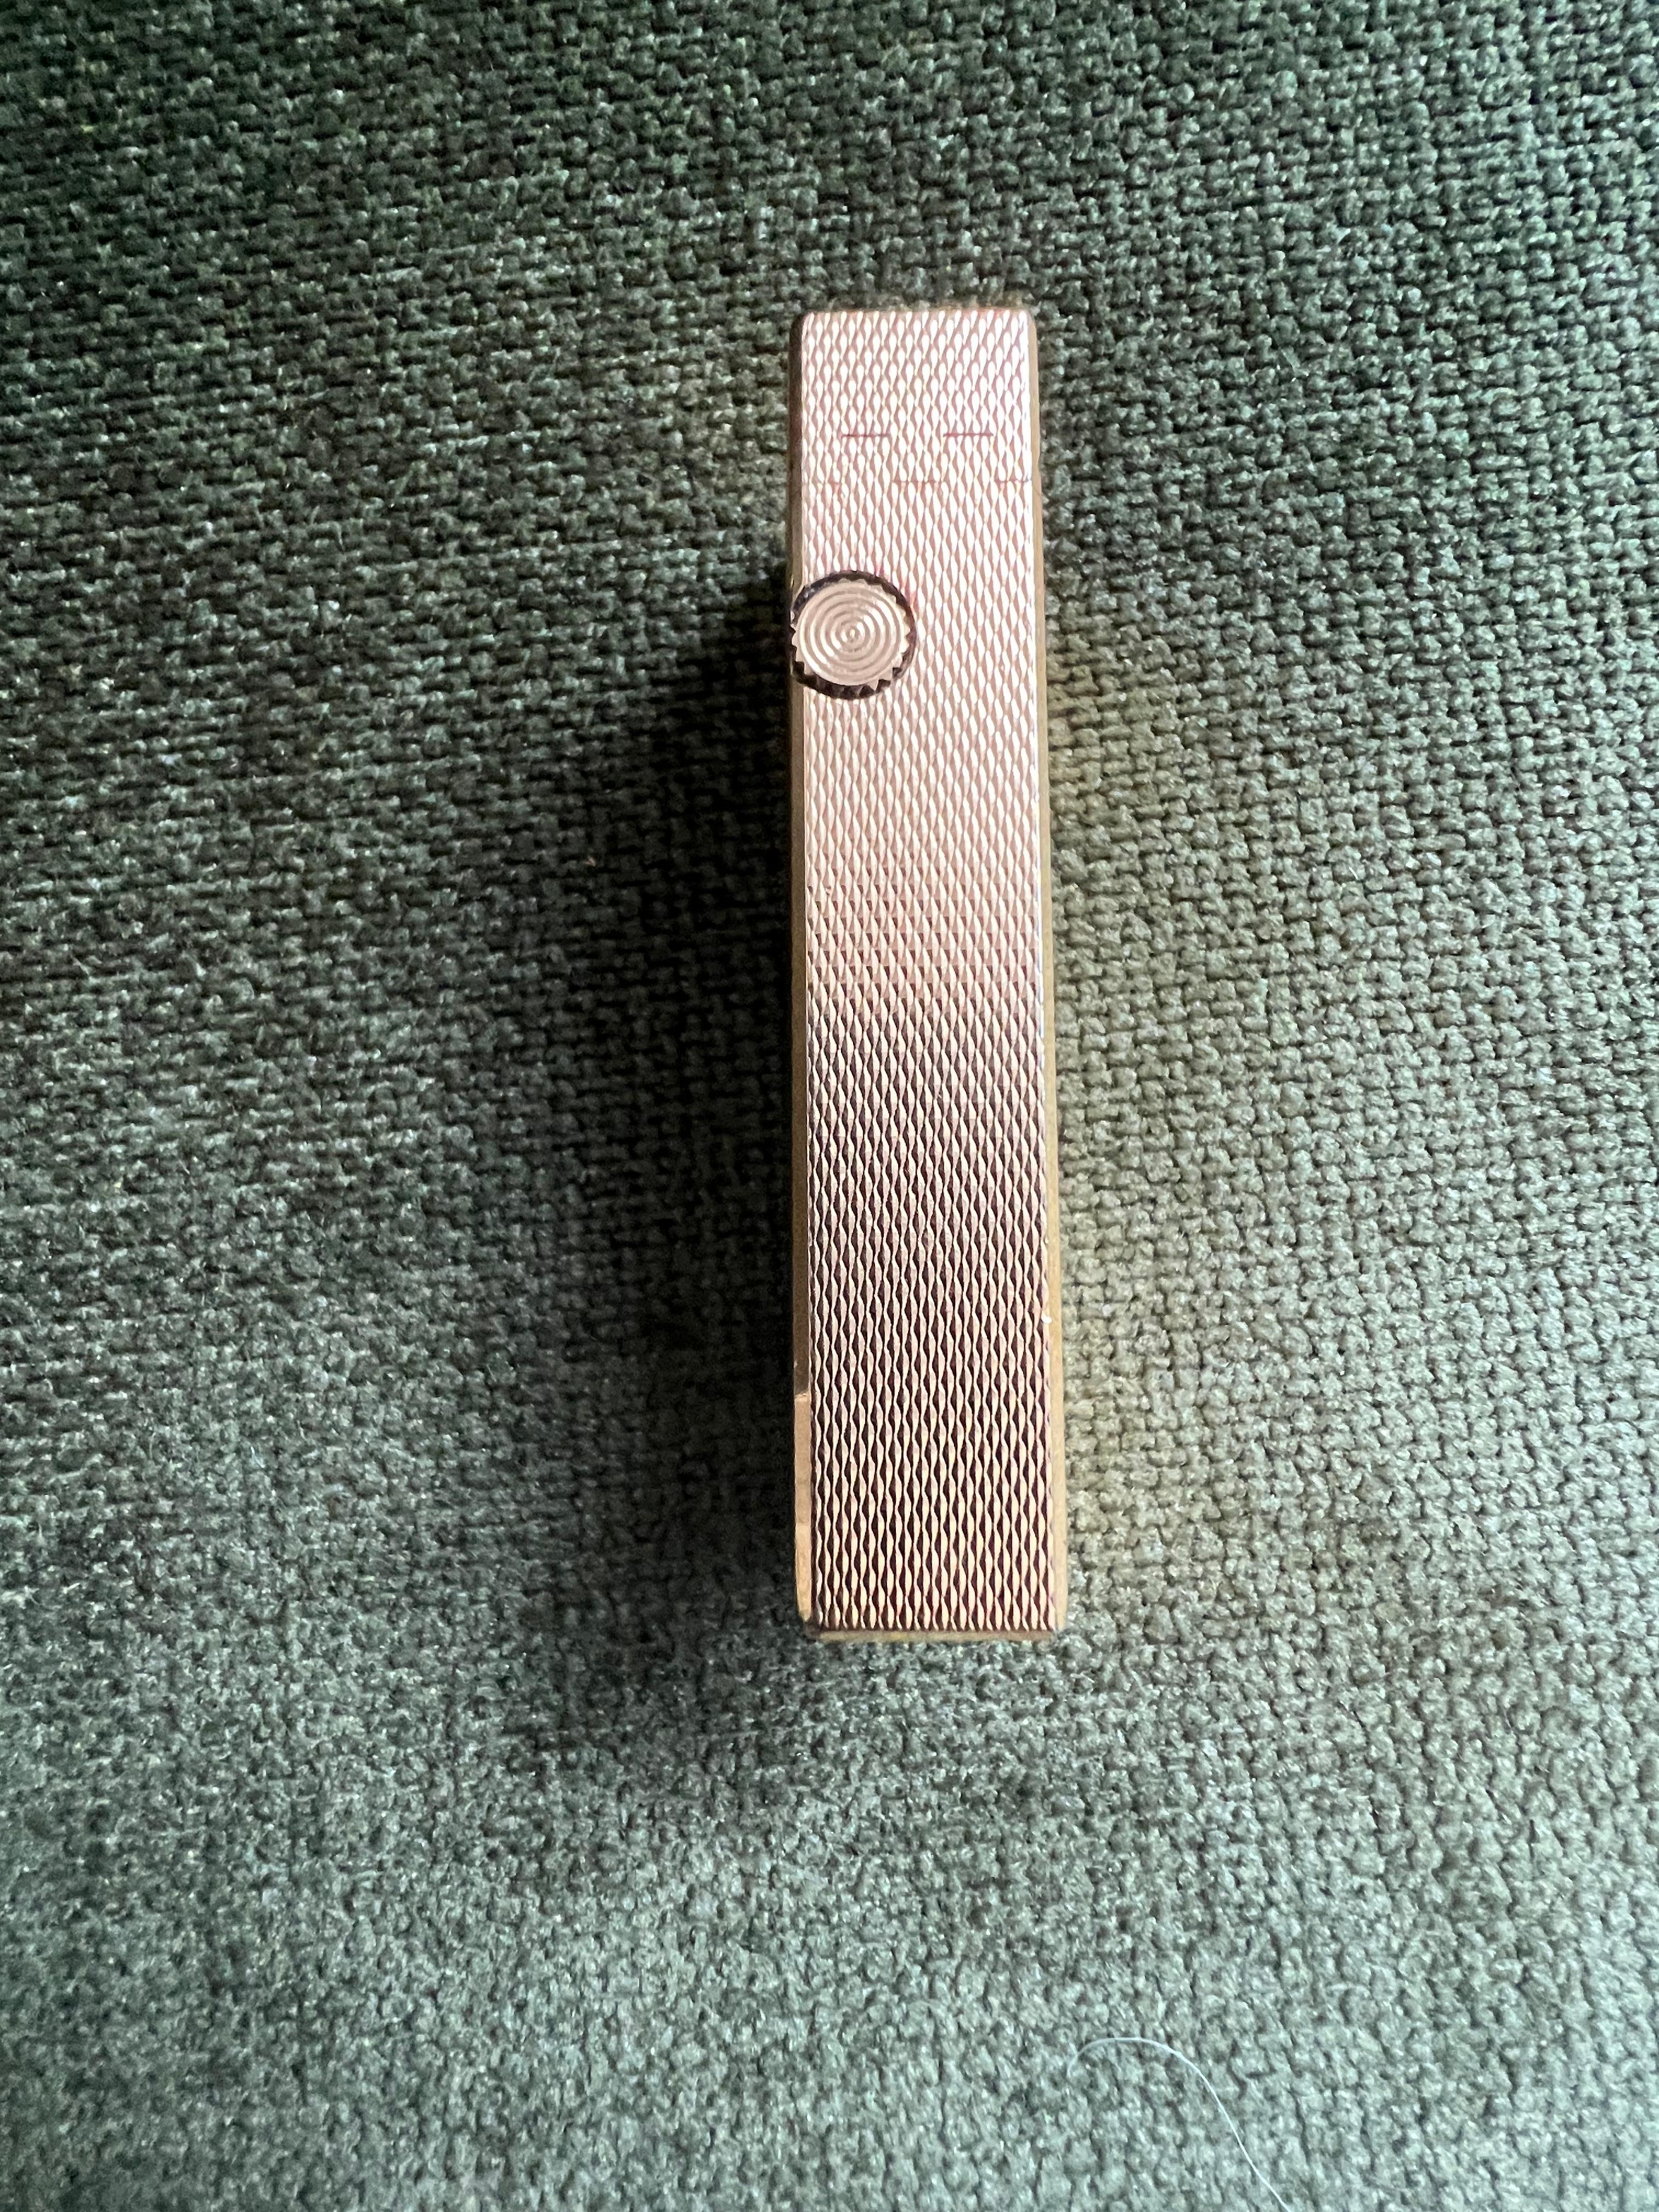 The James Bond Iconic and Rare Vintage Dunhill Gold and Swiss Made Lighter 1